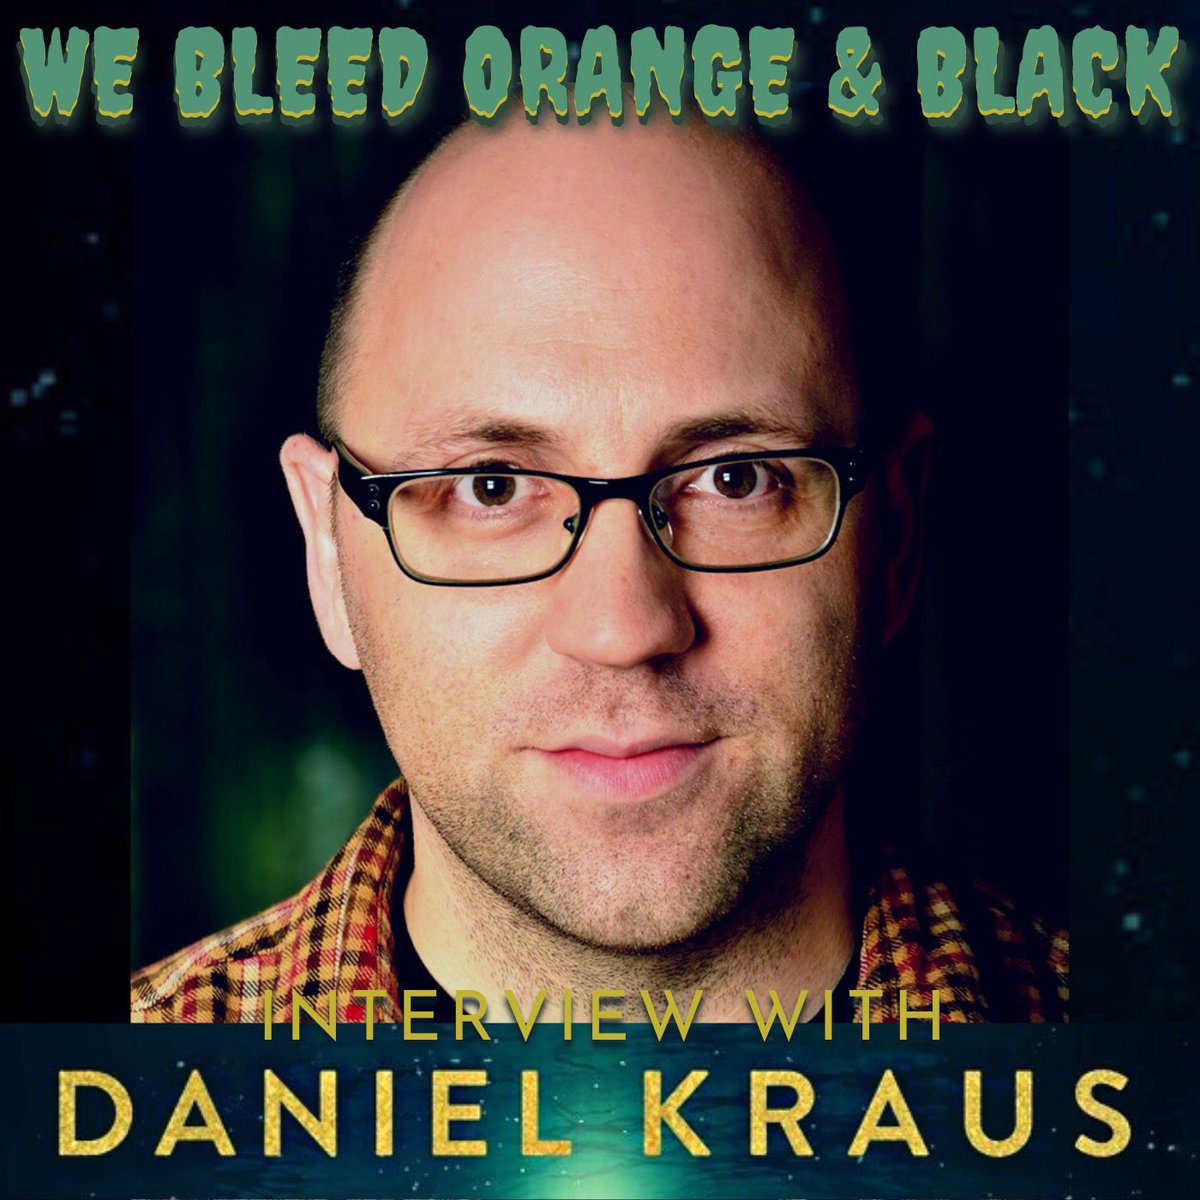 EPISODE # 45 – Interview with Daniel Kraus
(link in bio)
~~~
We chat about experimenting with genre and audience, strange collabs, learning to dive, constructing characters, and his new book WHALEFALL.
#DanielKraus #Whalefall #Thriller #EcoThriller #Whale #writing @simonschuster